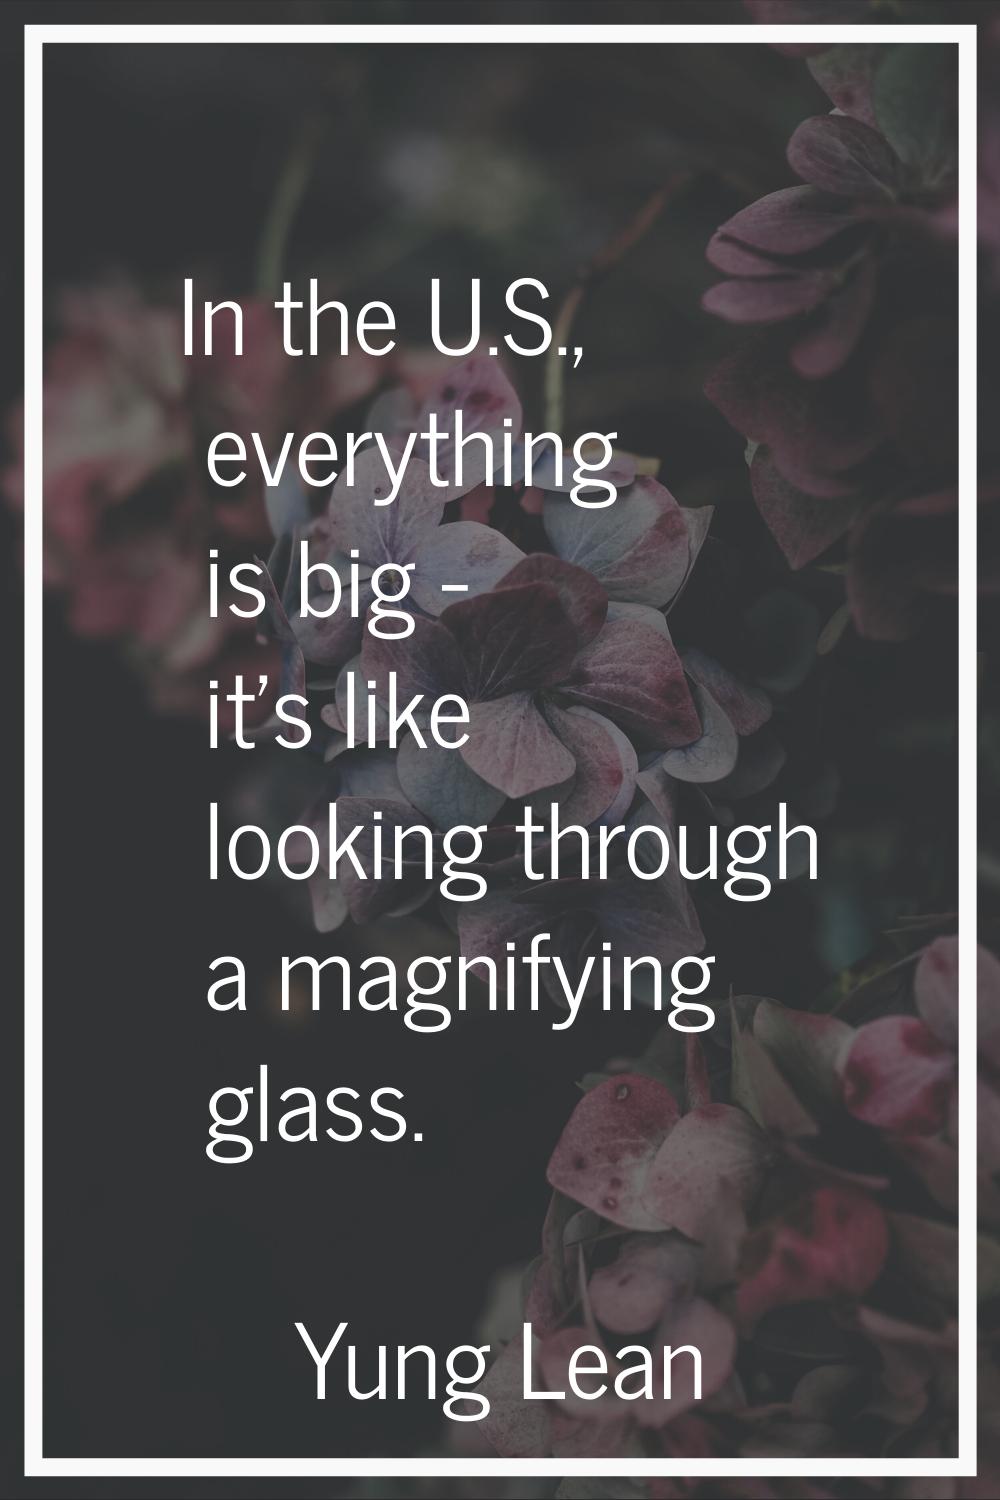 In the U.S., everything is big - it's like looking through a magnifying glass.